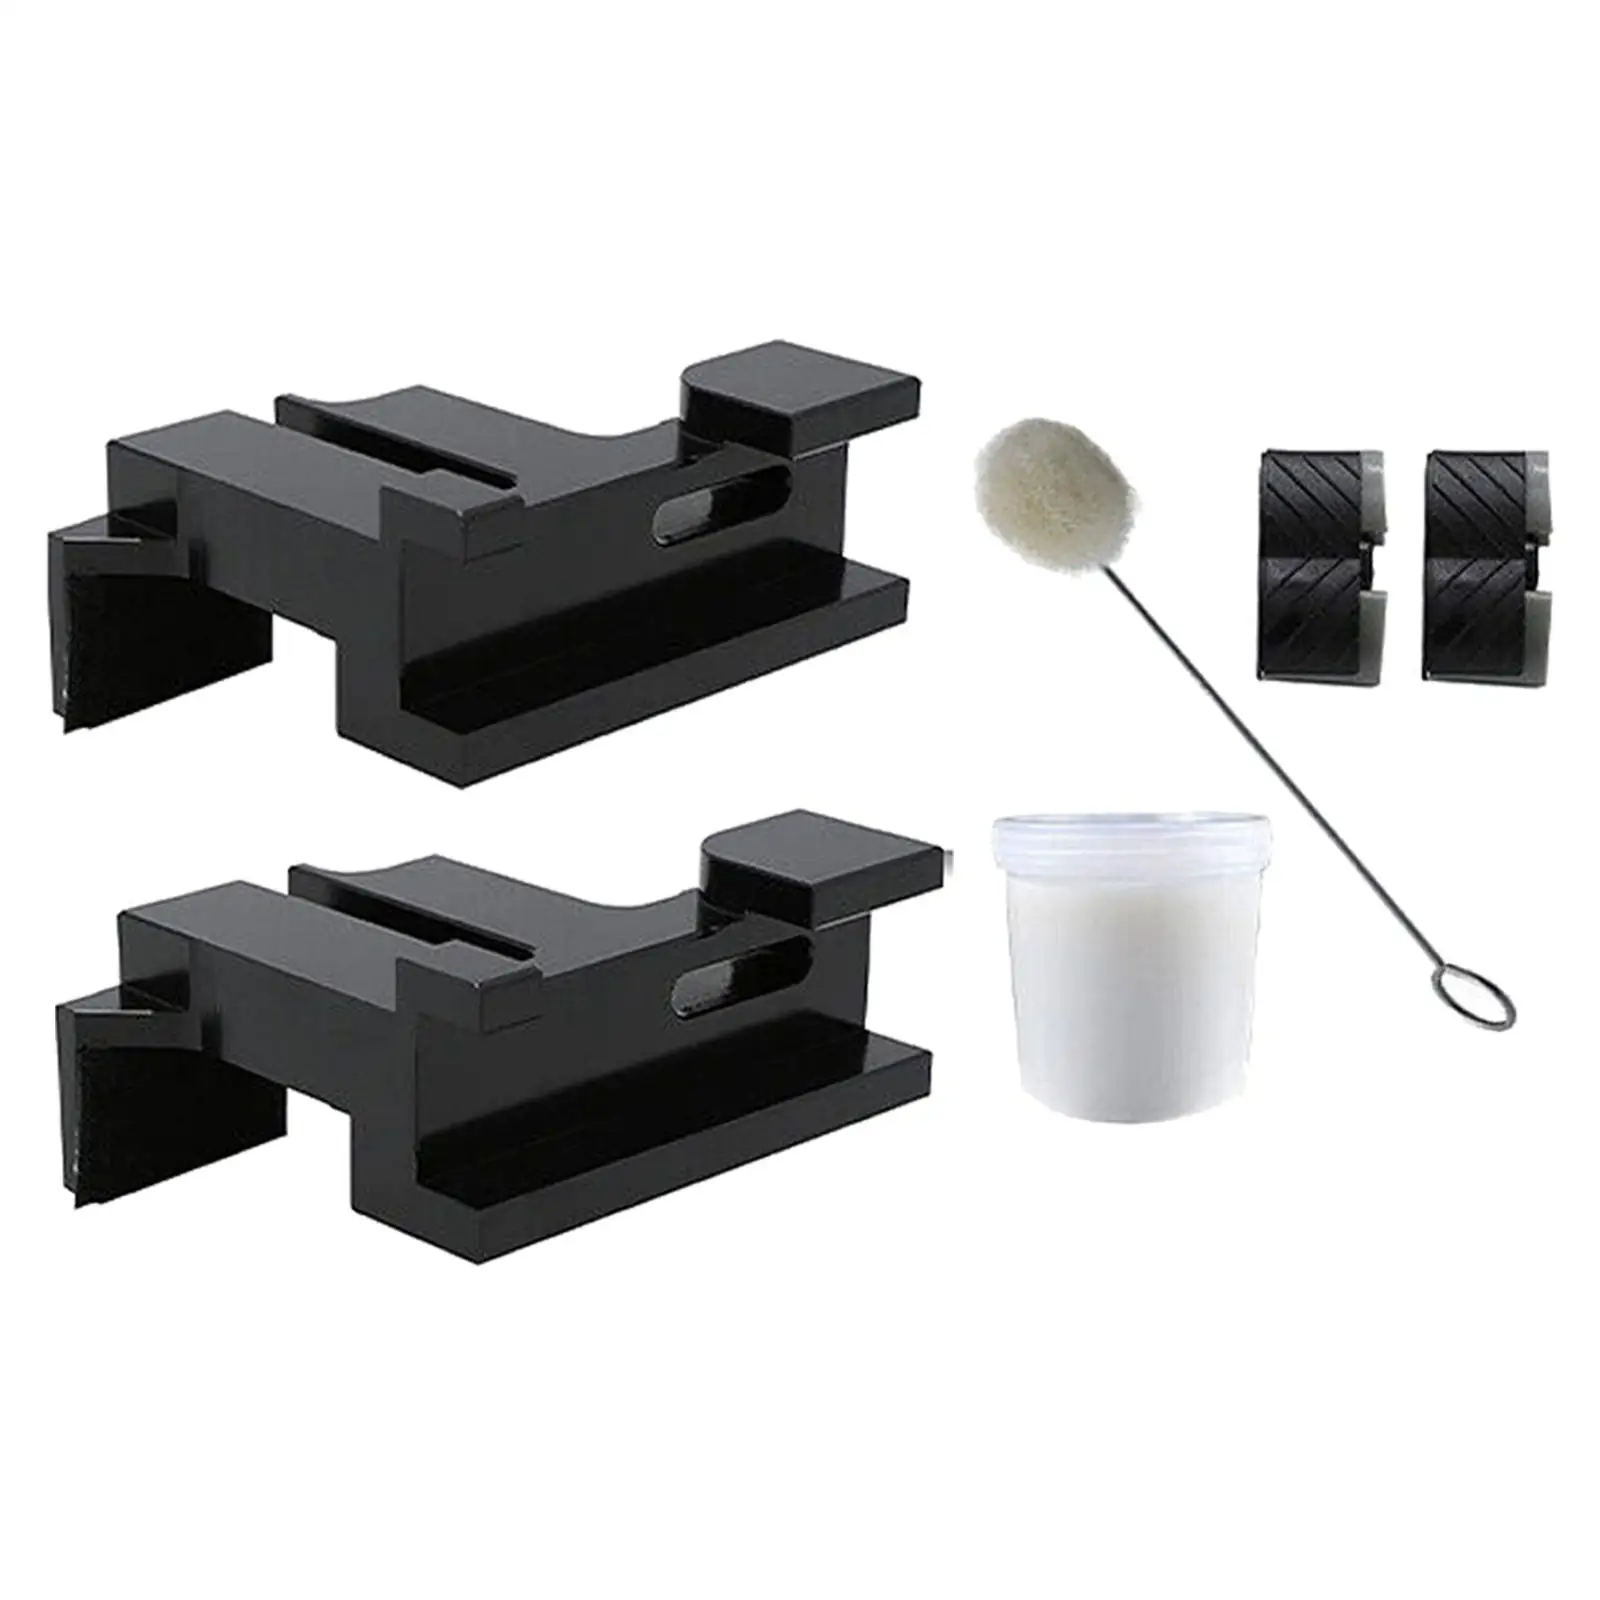 Sunroof Track Assembly Repair Set Replaces Part for Lincoln Mkx (2007-2015)